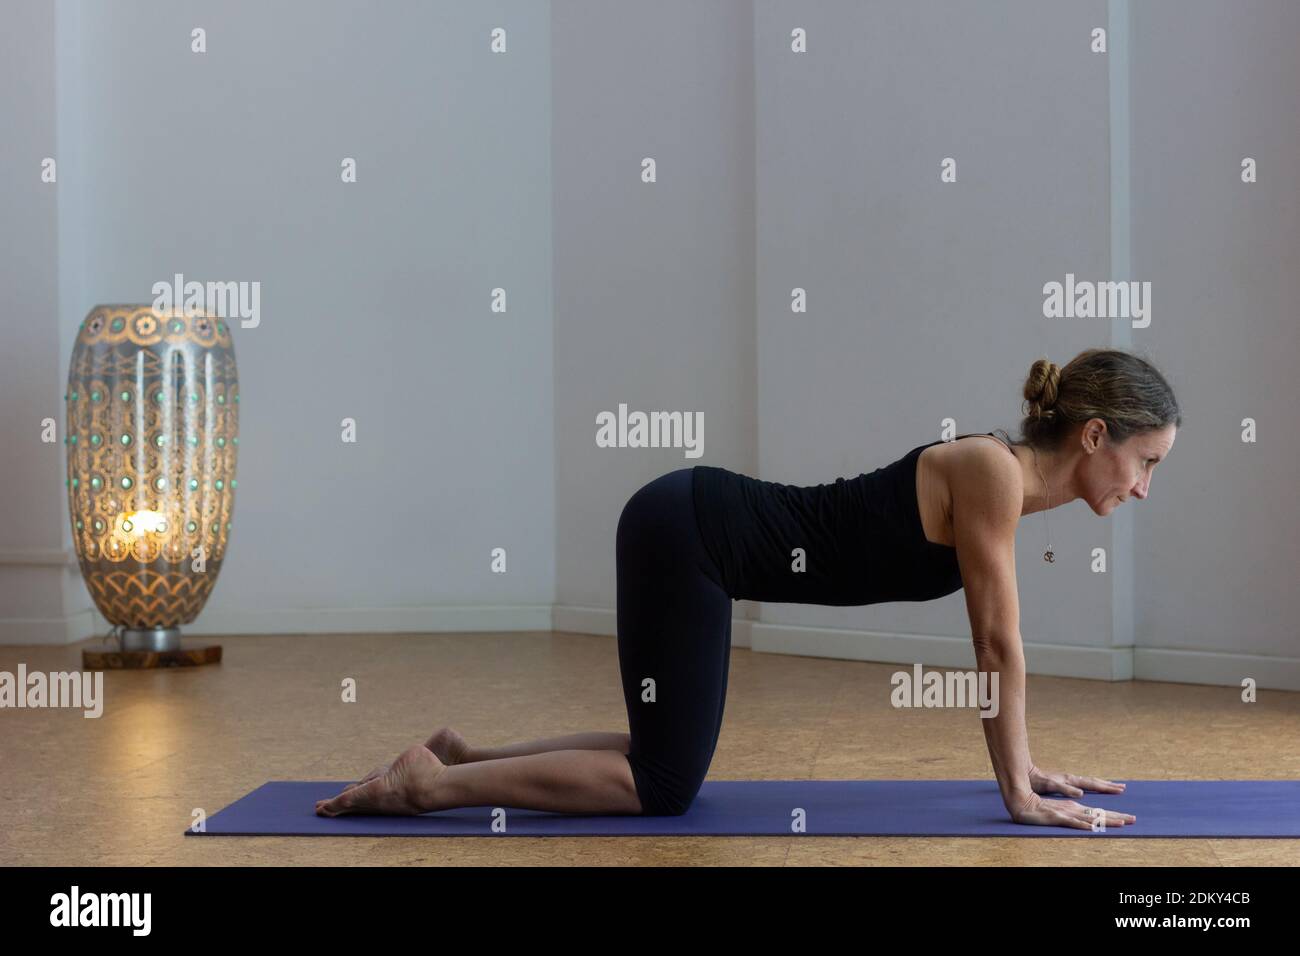 Slim woman practices yoga in bitilasana posture in studio. Female yogi in cow pose indoors. Staying fit, workout session at home concepts Stock Photo